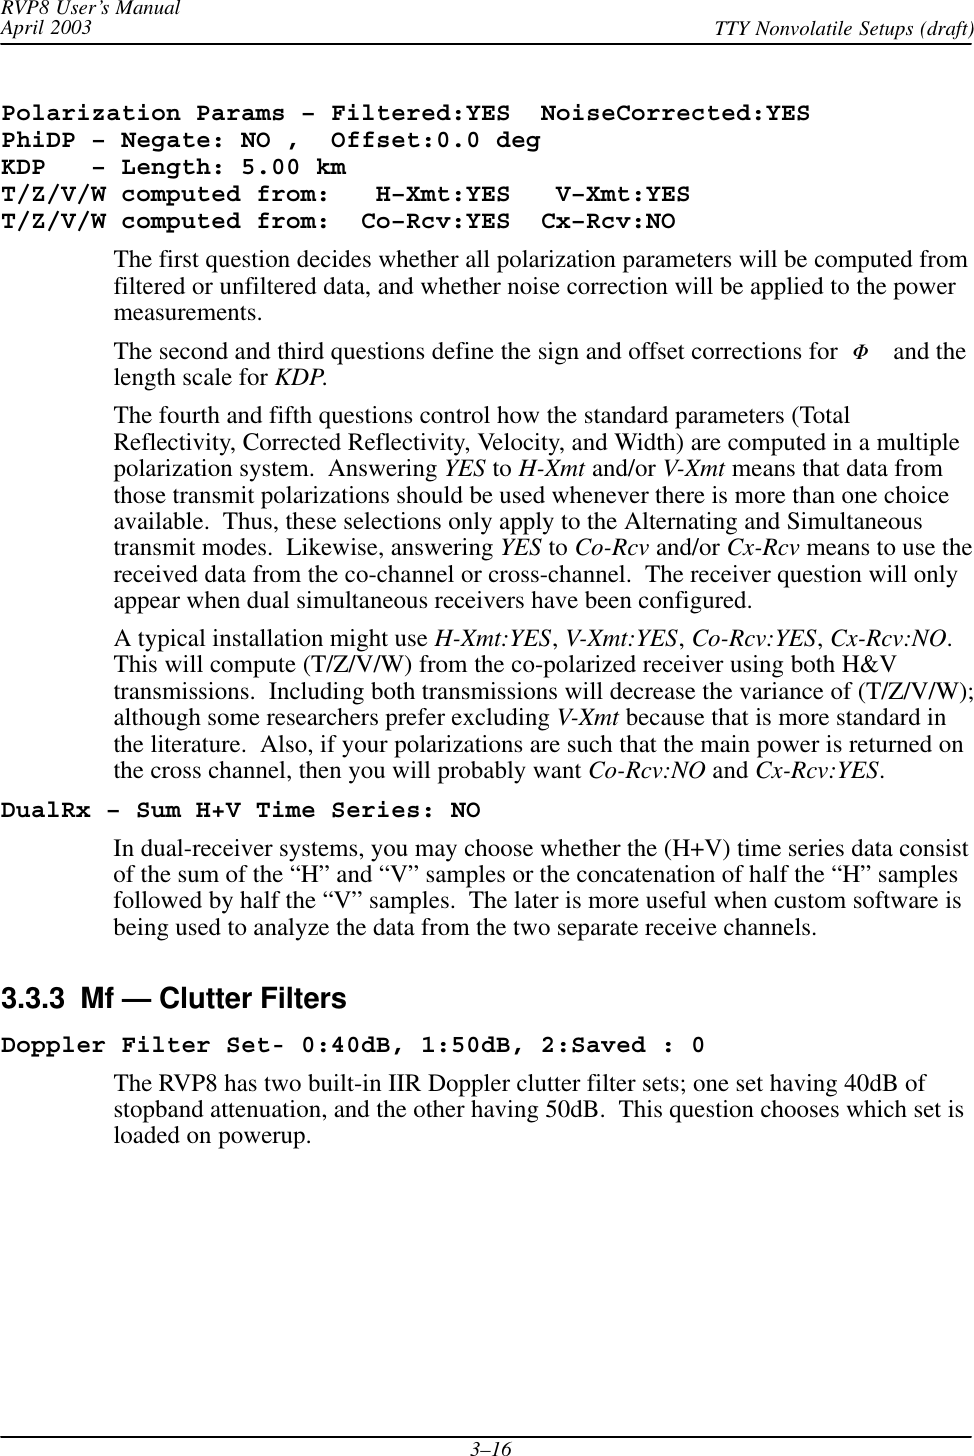 RVP8 User’s ManualApril 2003 TTY Nonvolatile Setups (draft)3–16Polarization Params – Filtered:YES  NoiseCorrected:YESPhiDP – Negate: NO ,  Offset:0.0 degKDP   – Length: 5.00 kmT/Z/V/W computed from:   H–Xmt:YES   V–Xmt:YEST/Z/V/W computed from:  Co–Rcv:YES  Cx–Rcv:NOThe first question decides whether all polarization parameters will be computed fromfiltered or unfiltered data, and whether noise correction will be applied to the powermeasurements.The second and third questions define the sign and offset corrections for  F and thelength scale for KDP.The fourth and fifth questions control how the standard parameters (TotalReflectivity, Corrected Reflectivity, Velocity, and Width) are computed in a multiplepolarization system.  Answering YES to H-Xmt and/or V-Xmt means that data fromthose transmit polarizations should be used whenever there is more than one choiceavailable.  Thus, these selections only apply to the Alternating and Simultaneoustransmit modes.  Likewise, answering YES to Co-Rcv and/or Cx-Rcv means to use thereceived data from the co-channel or cross-channel.  The receiver question will onlyappear when dual simultaneous receivers have been configured.A typical installation might use H-Xmt:YES,V-Xmt:YES,Co-Rcv:YES,Cx-Rcv:NO.This will compute (T/Z/V/W) from the co-polarized receiver using both H&amp;Vtransmissions.  Including both transmissions will decrease the variance of (T/Z/V/W);although some researchers prefer excluding V-Xmt because that is more standard inthe literature.  Also, if your polarizations are such that the main power is returned onthe cross channel, then you will probably want Co-Rcv:NO and Cx-Rcv:YES.DualRx – Sum H+V Time Series: NOIn dual-receiver systems, you may choose whether the (H+V) time series data consistof the sum of the “H” and “V” samples or the concatenation of half the “H” samplesfollowed by half the “V” samples.  The later is more useful when custom software isbeing used to analyze the data from the two separate receive channels.3.3.3  Mf — Clutter FiltersDoppler Filter Set- 0:40dB, 1:50dB, 2:Saved : 0The RVP8 has two built-in IIR Doppler clutter filter sets; one set having 40dB ofstopband attenuation, and the other having 50dB.  This question chooses which set isloaded on powerup.